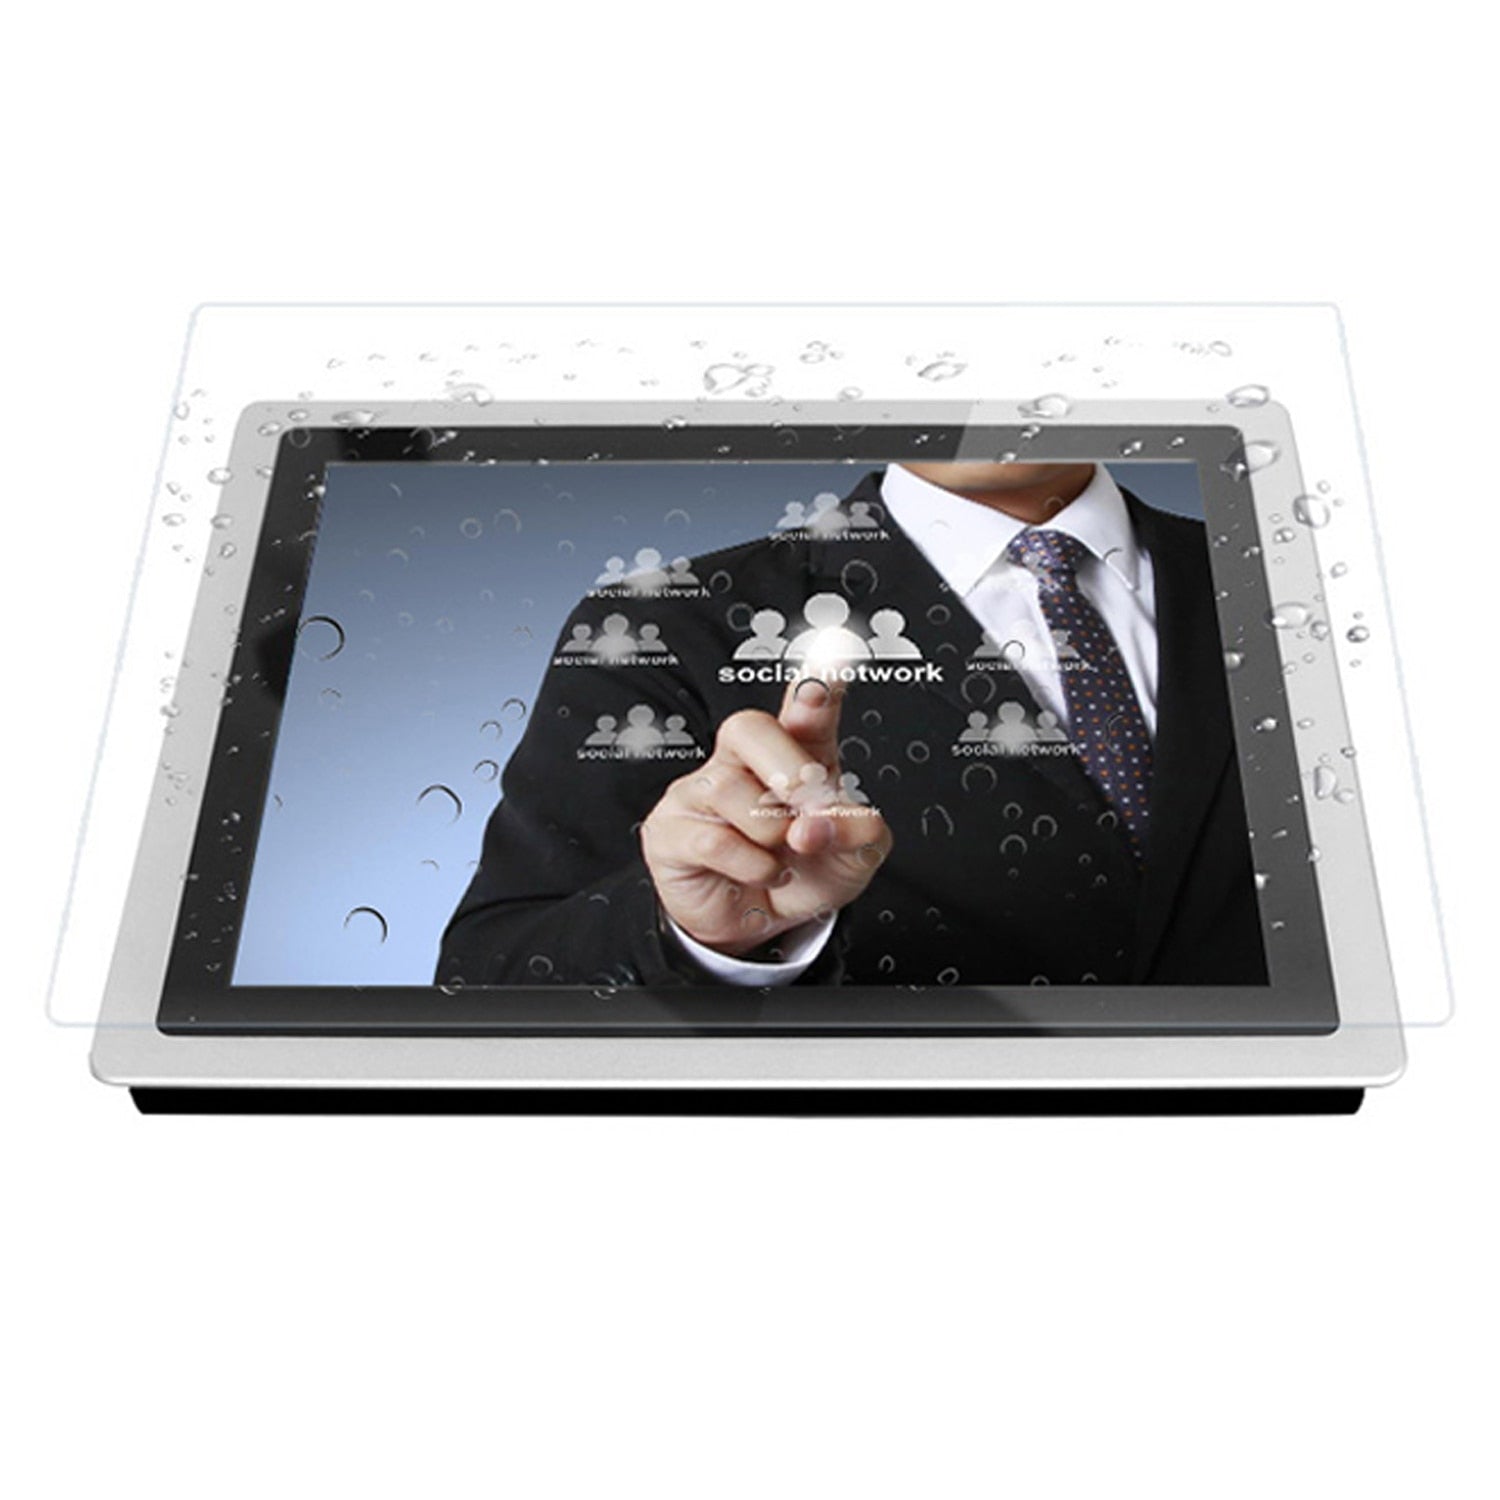 12.1 Inch Industrial All-in-one PC Embedded Tablet Computer Capacitive Touch Screen Built-in Wireless WiFi RS232 COM 1024*768